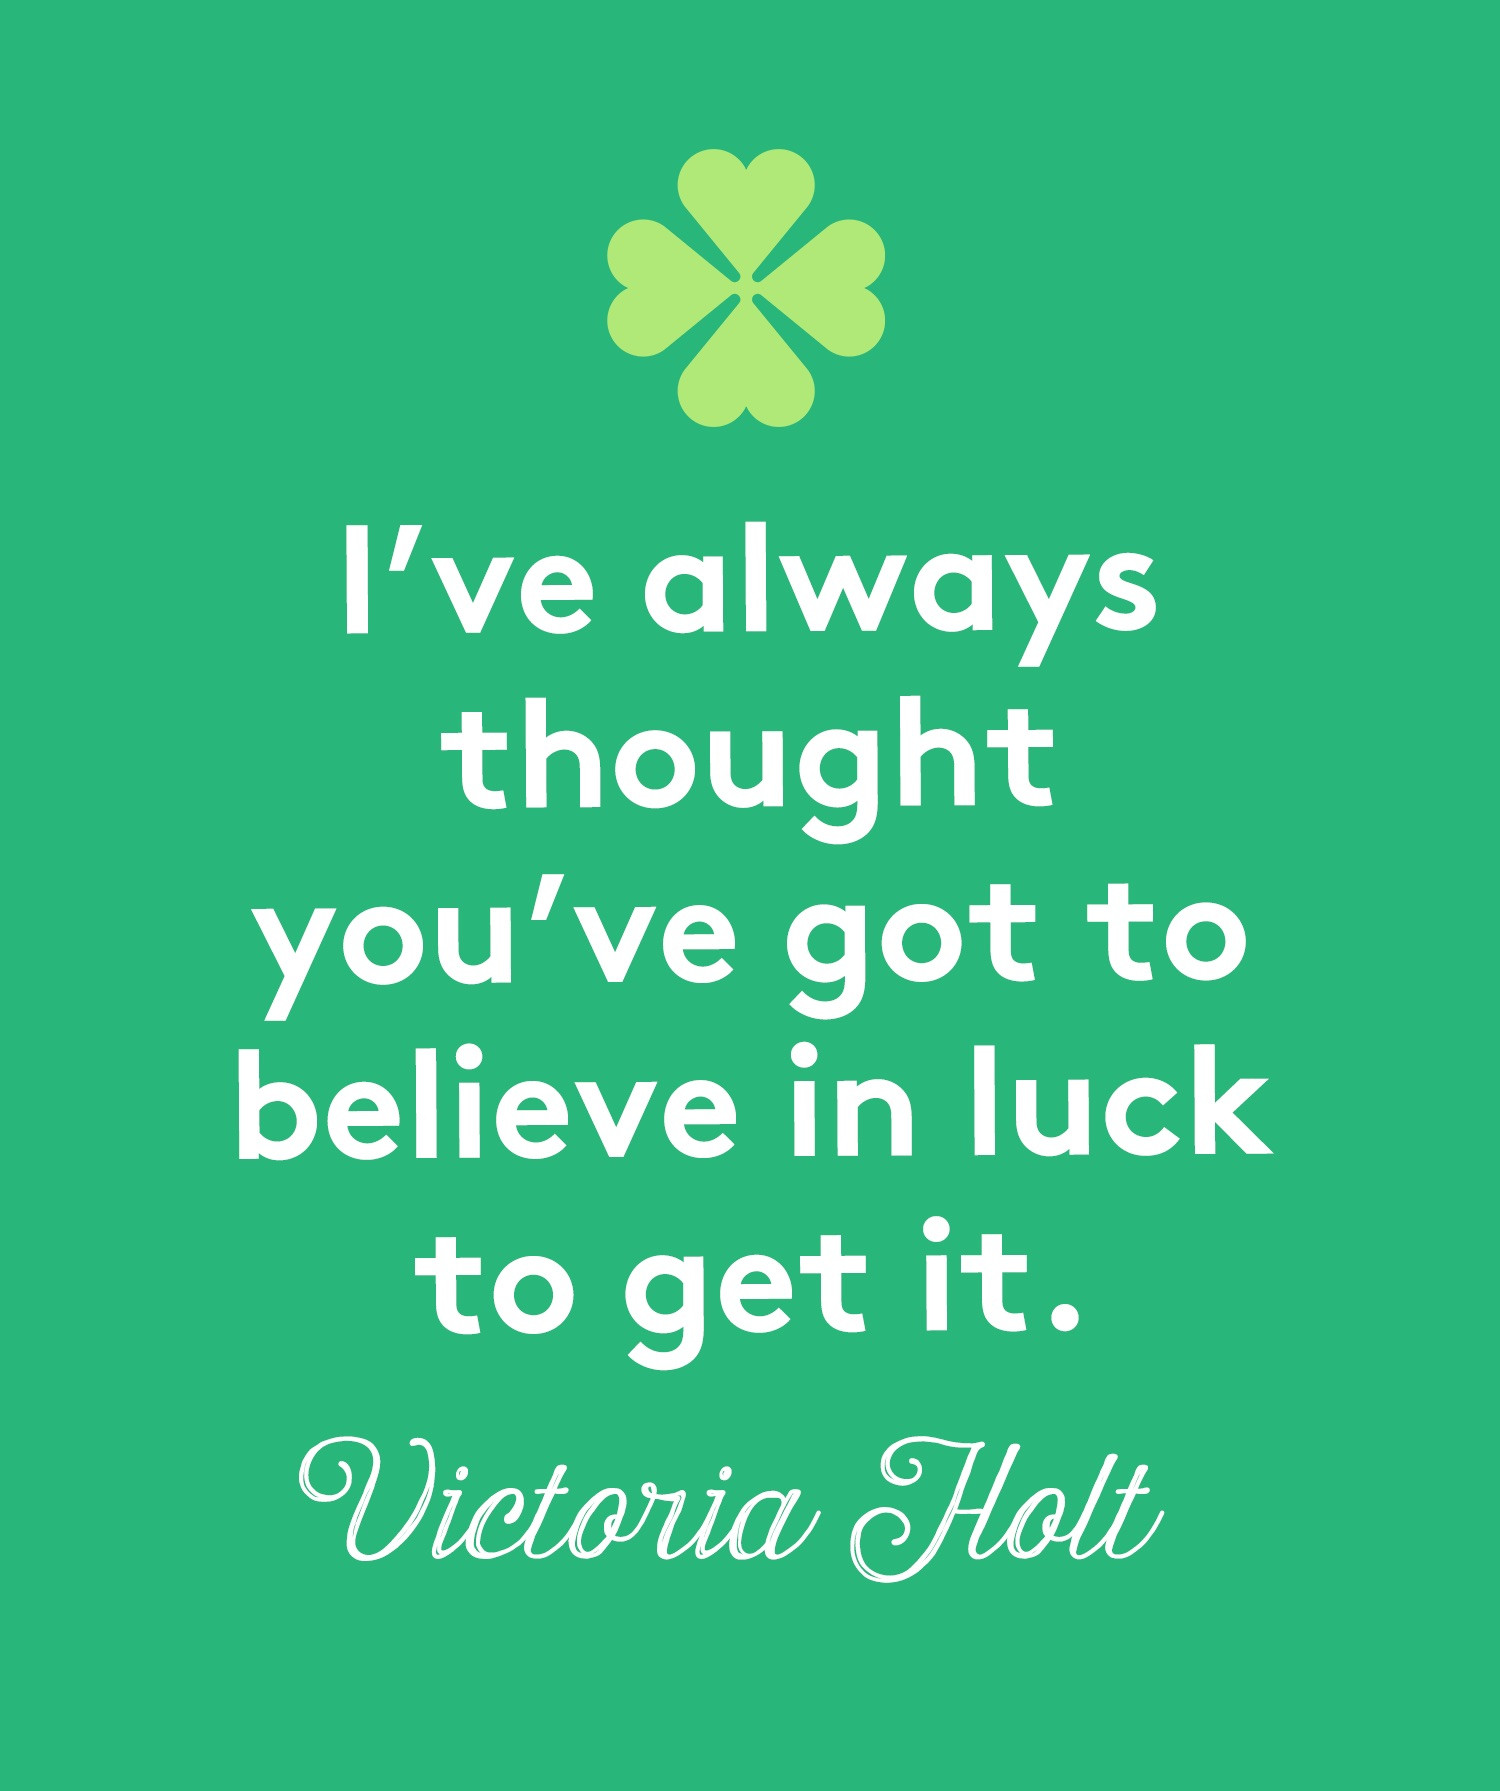 St Patrick's Day Lucky Quotes
 9 St Patrick’s Day Memes and Quotes You’ll Send to